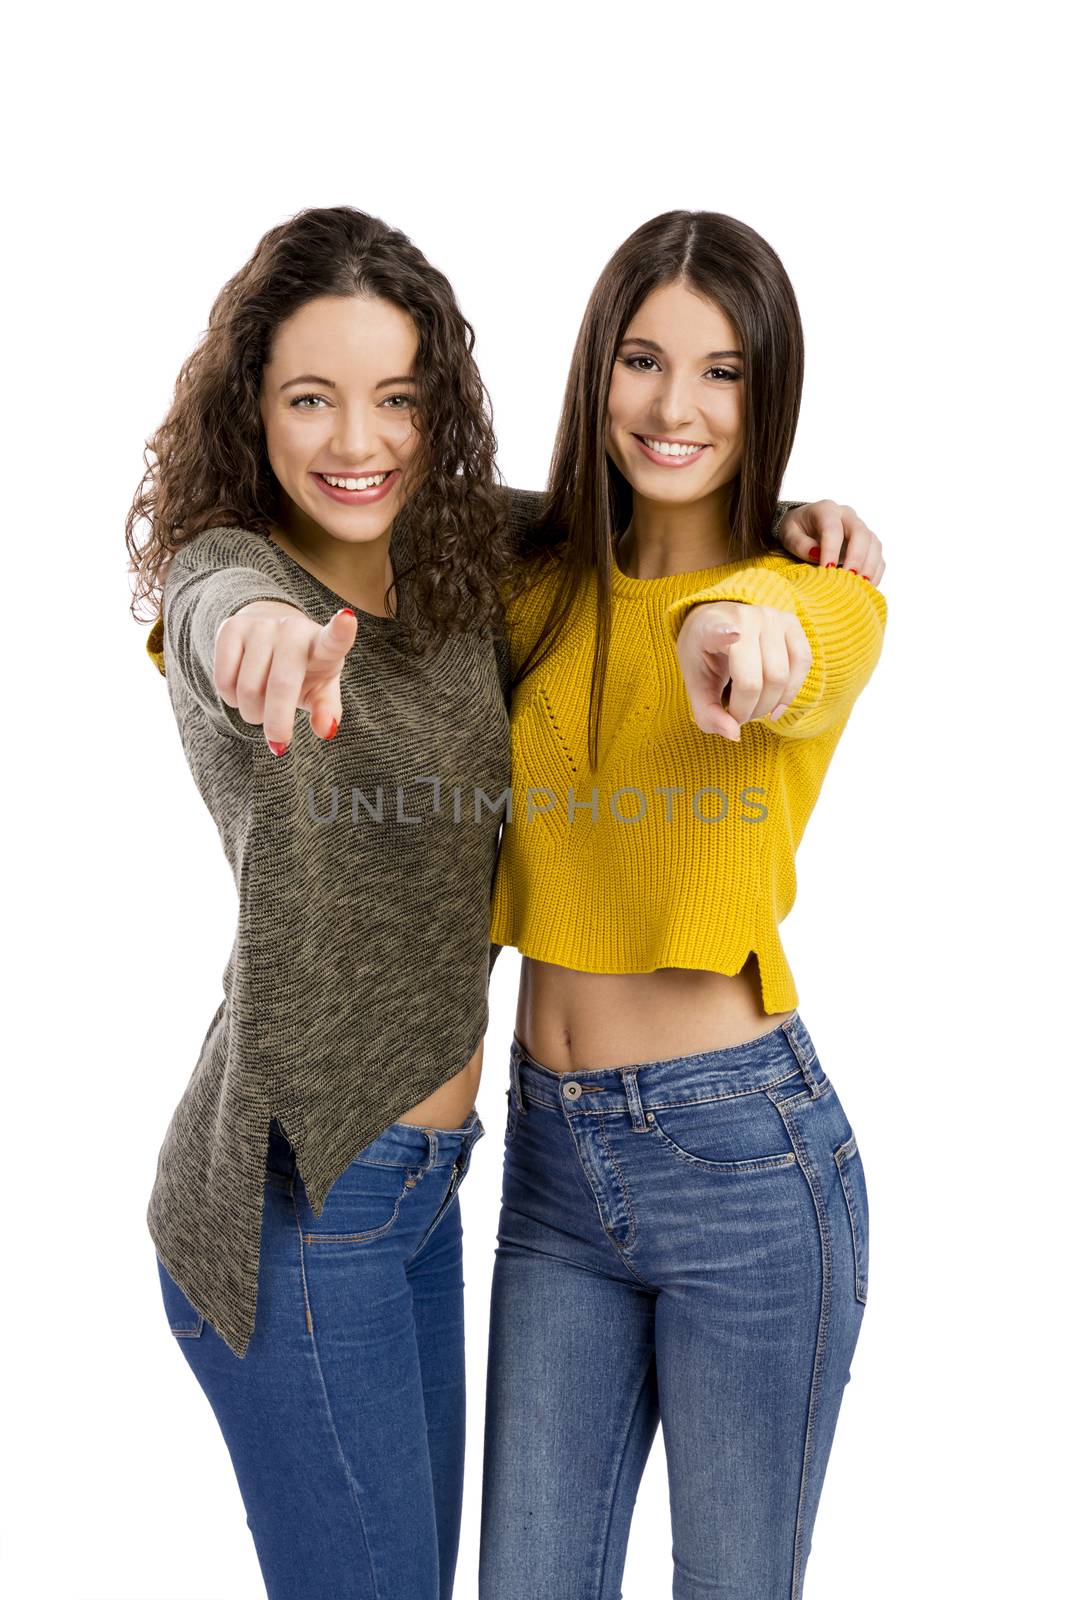 Studio portrait of two beautiful girls pointing and looking to the camera